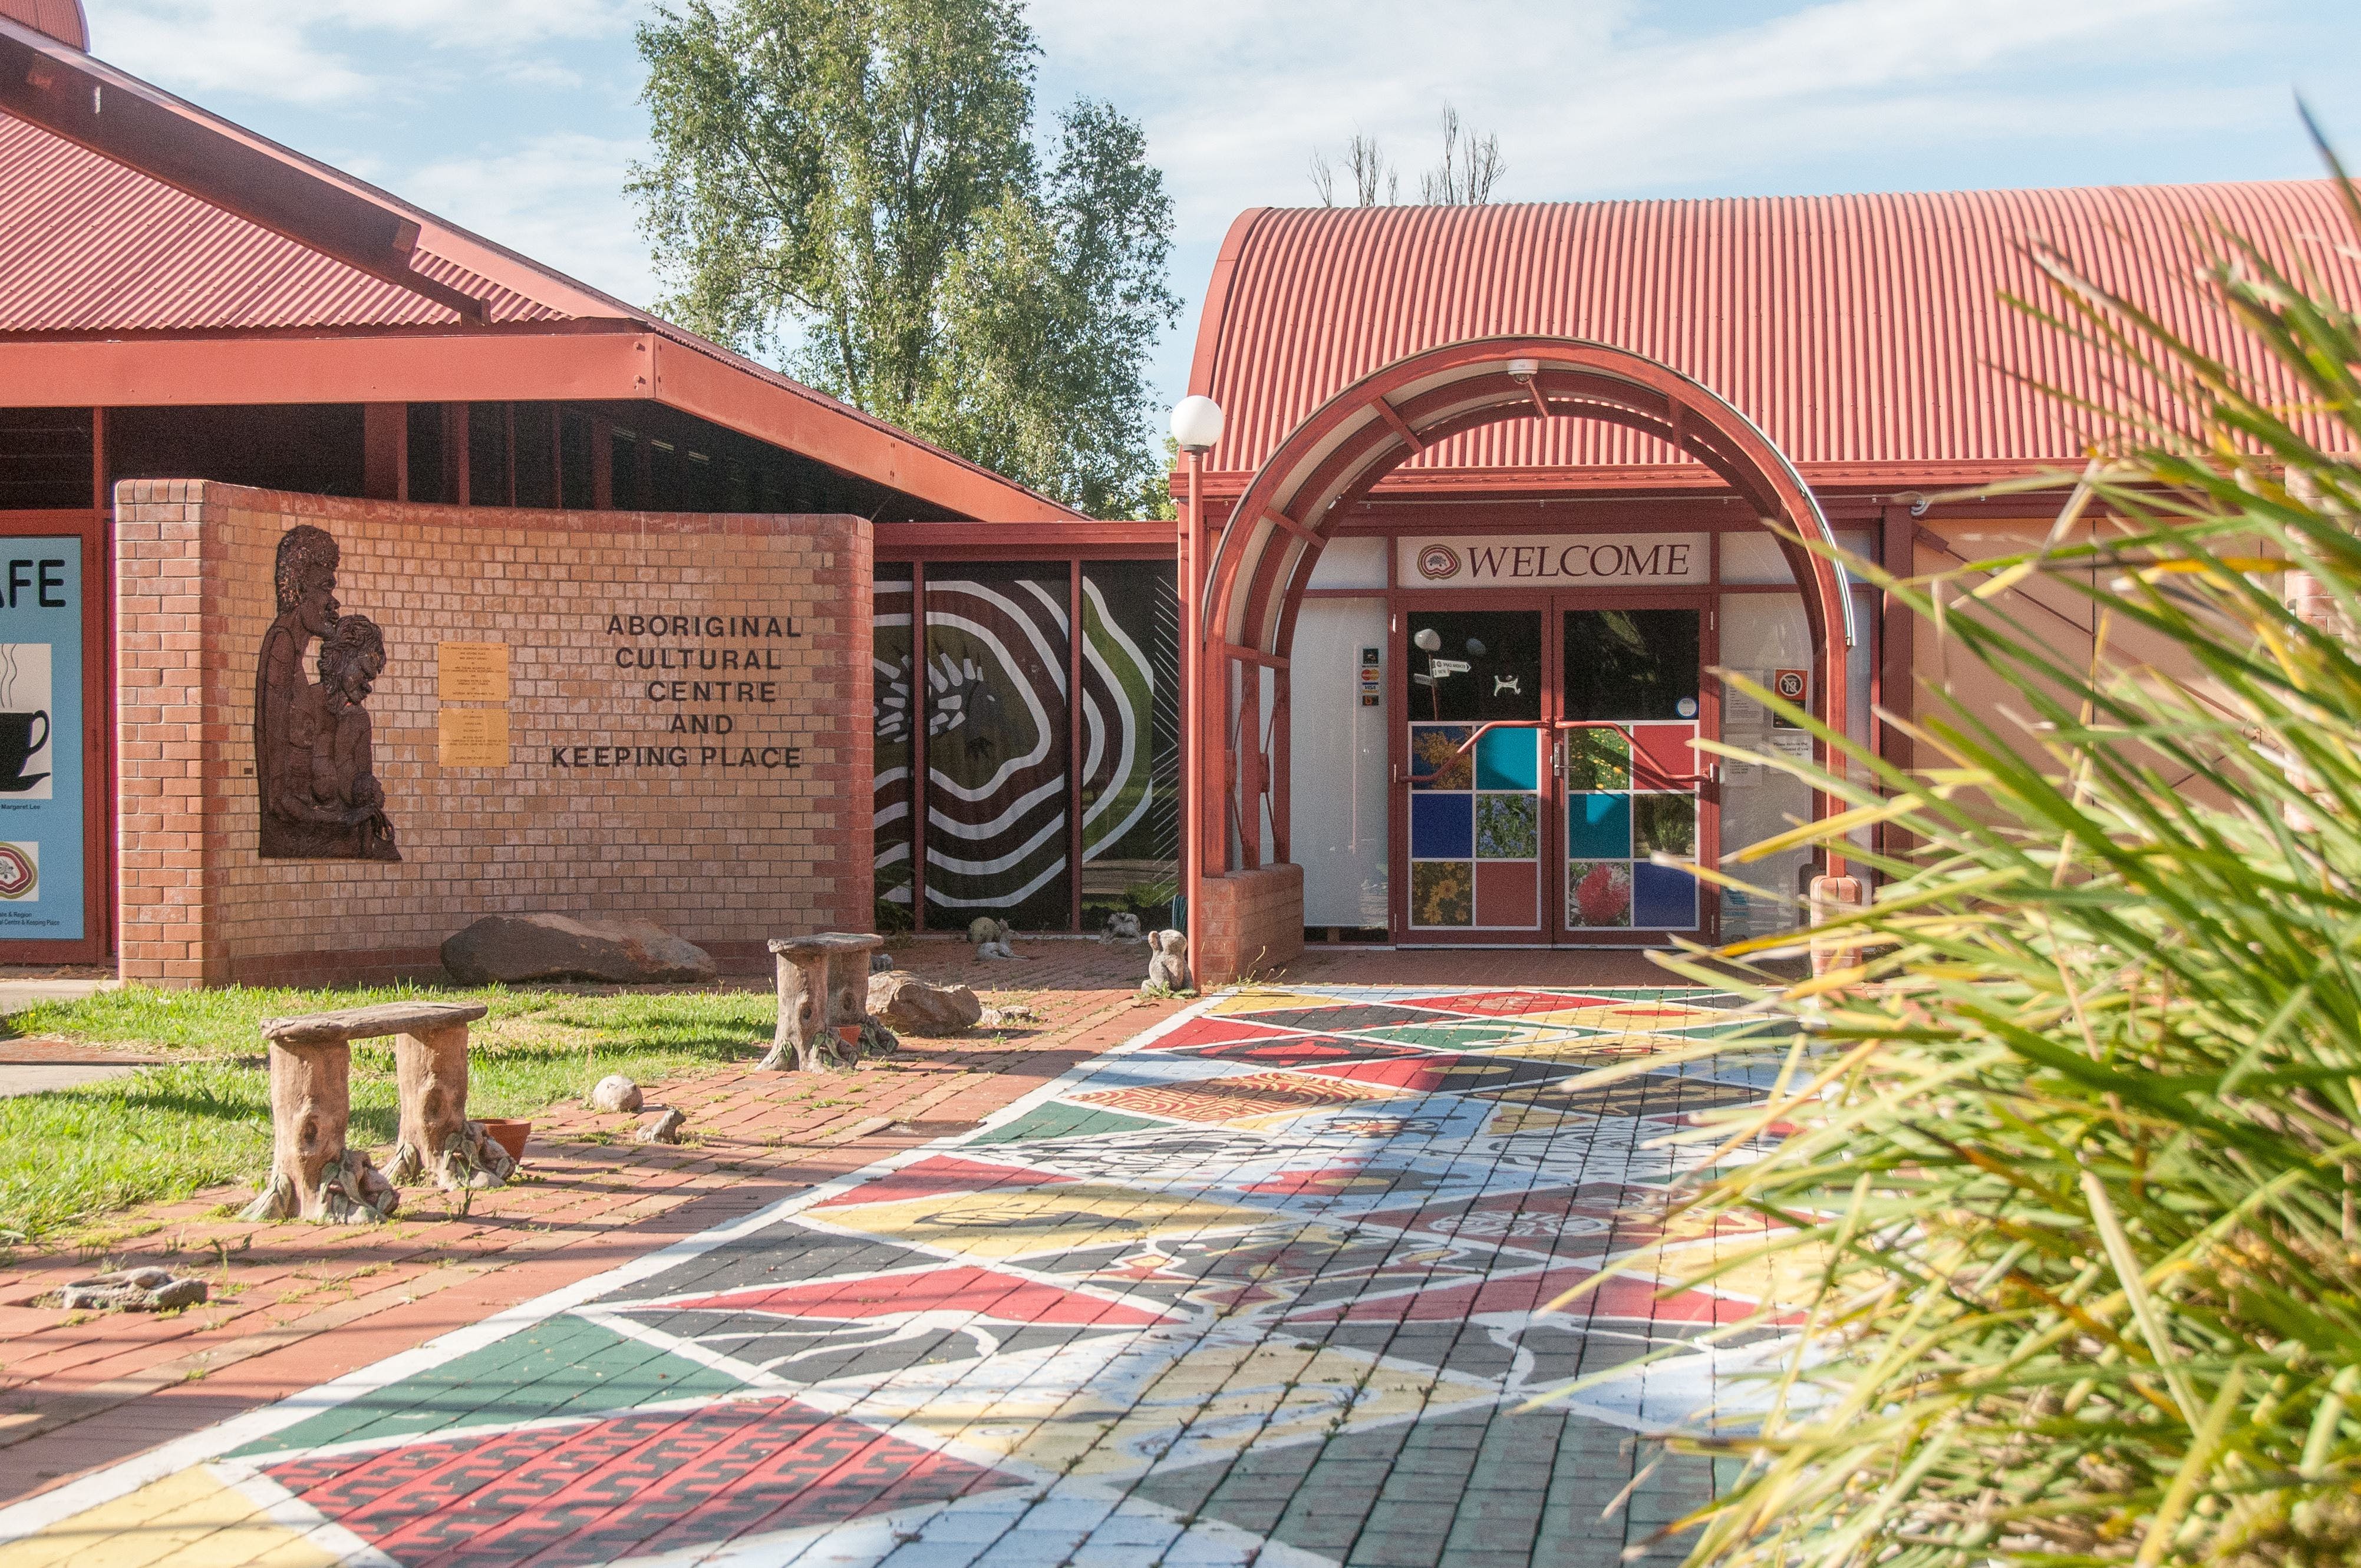 Armidale and Region Aboriginal Cultural Centre and Keeping Place - Attractions